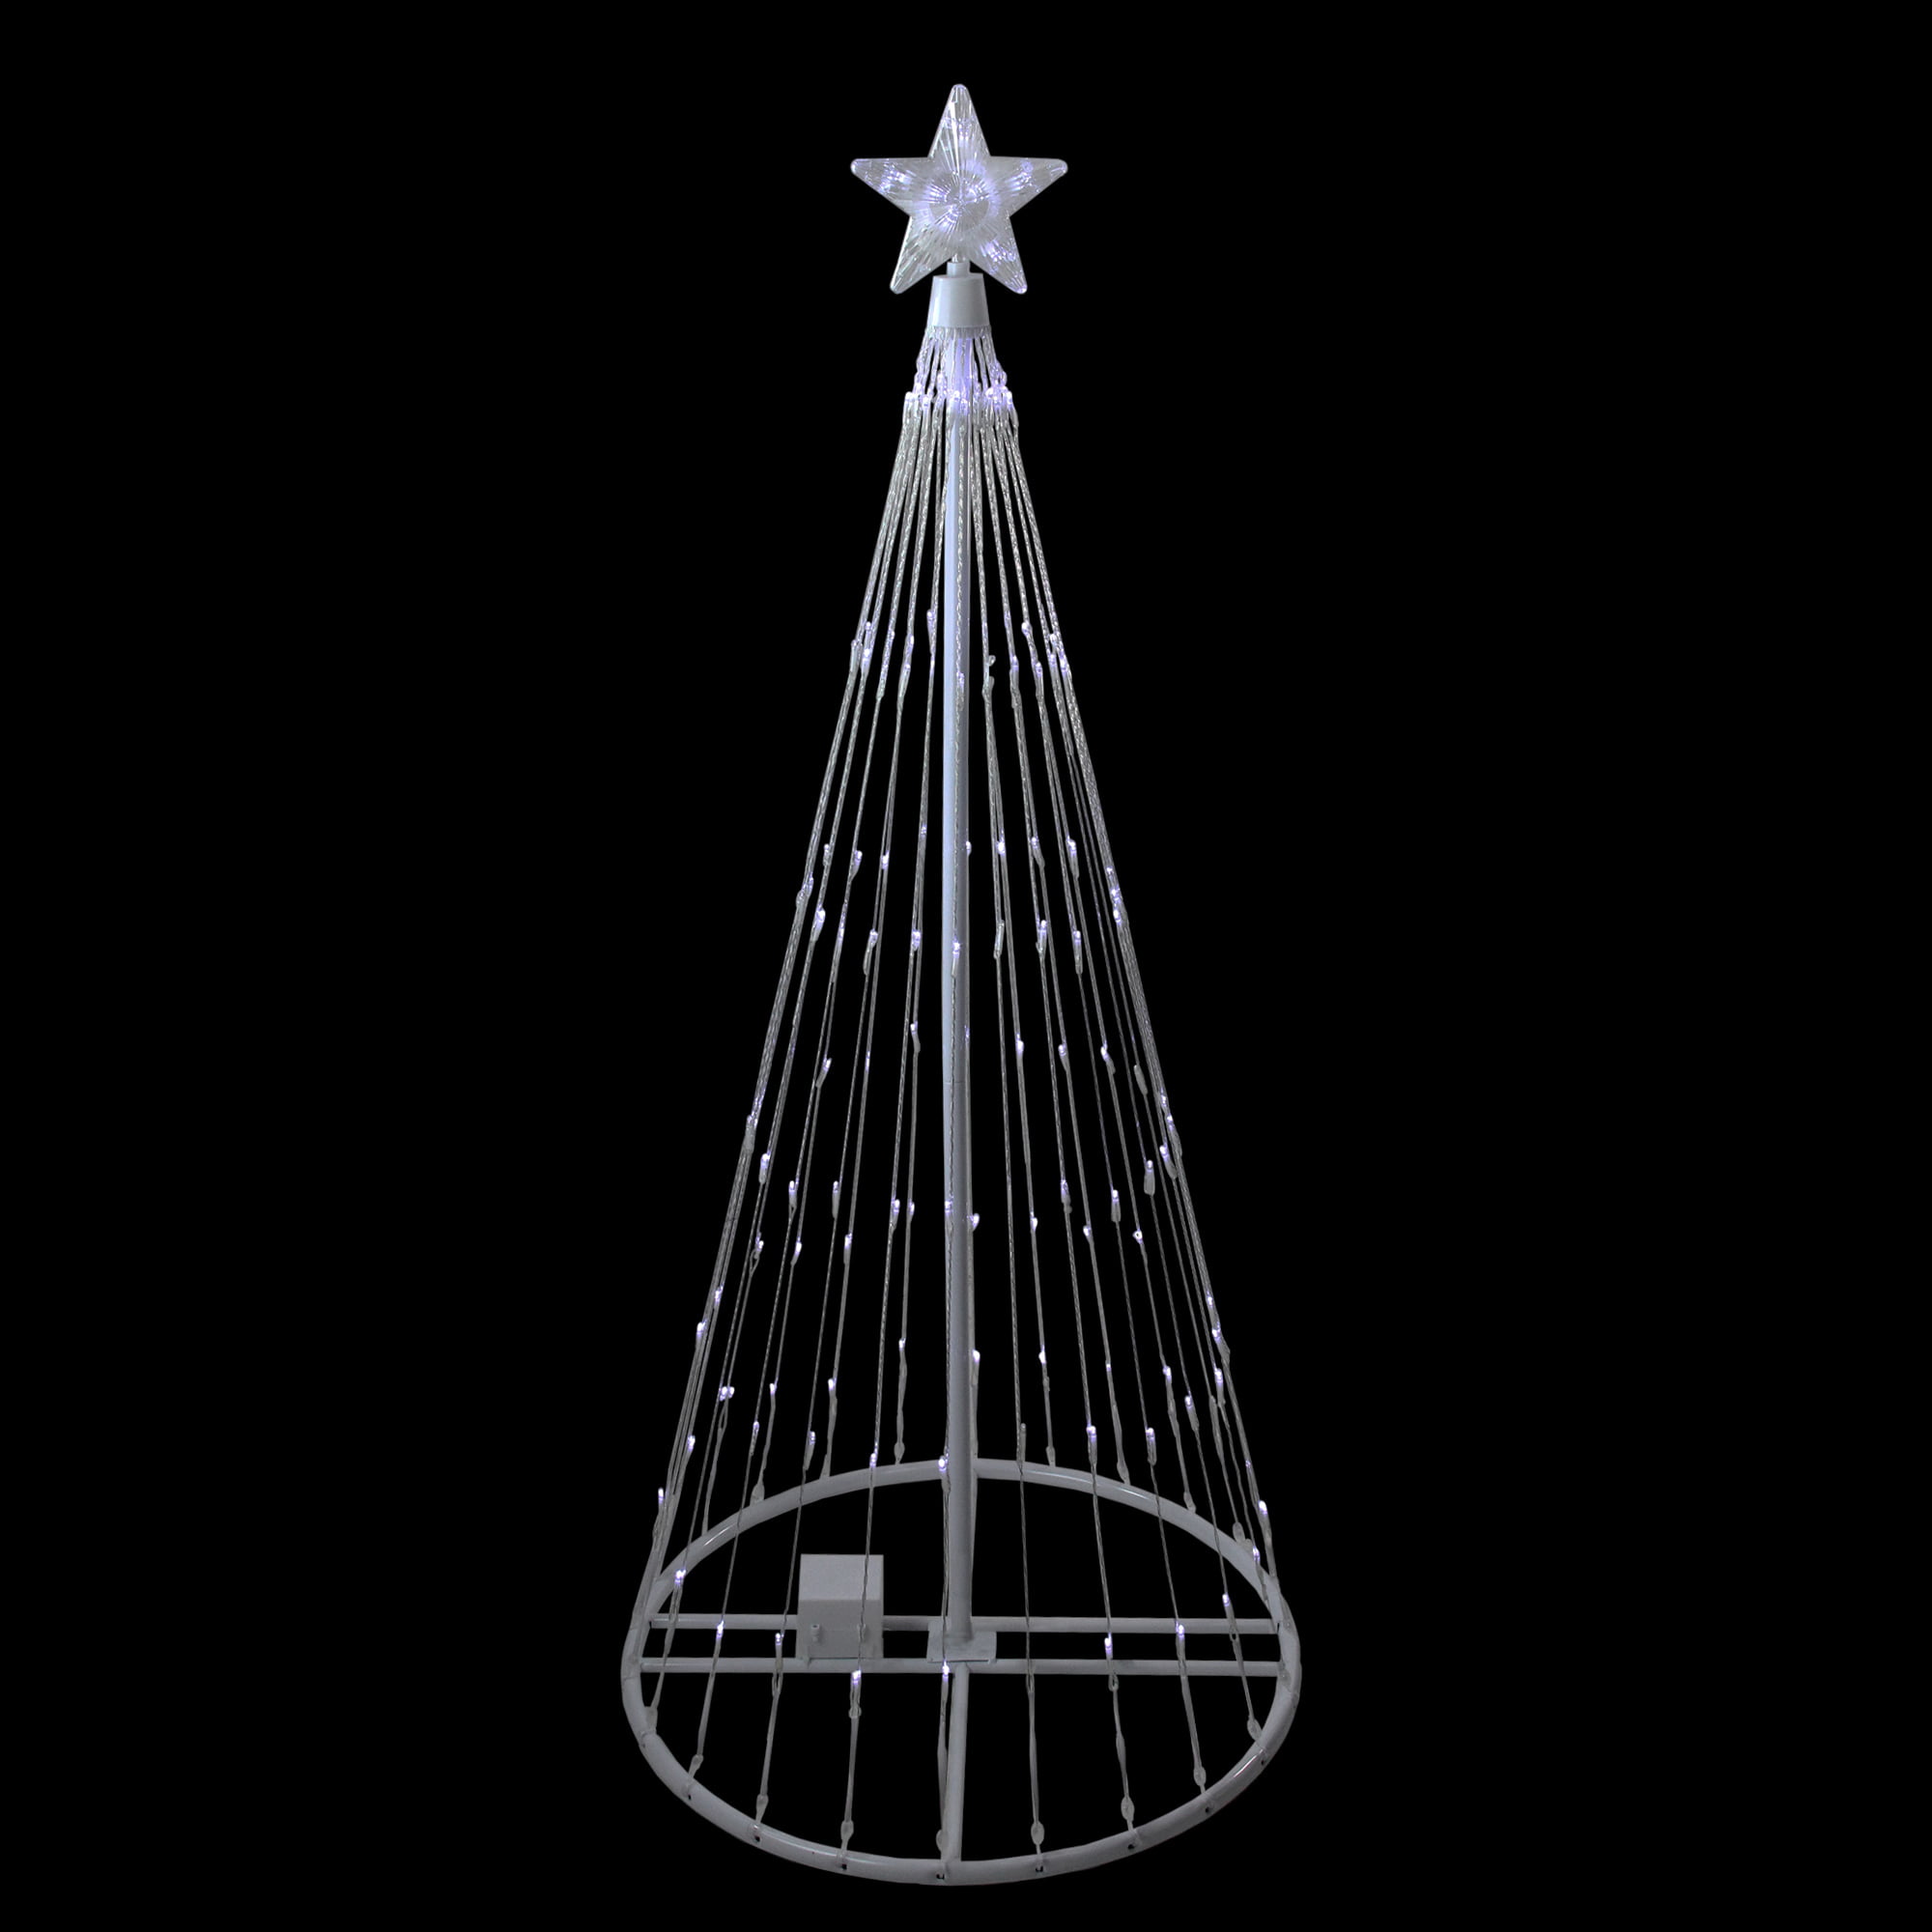 Northlight 4' Polar White LED Lighted Show Cone Christmas Tree Outdoor ...